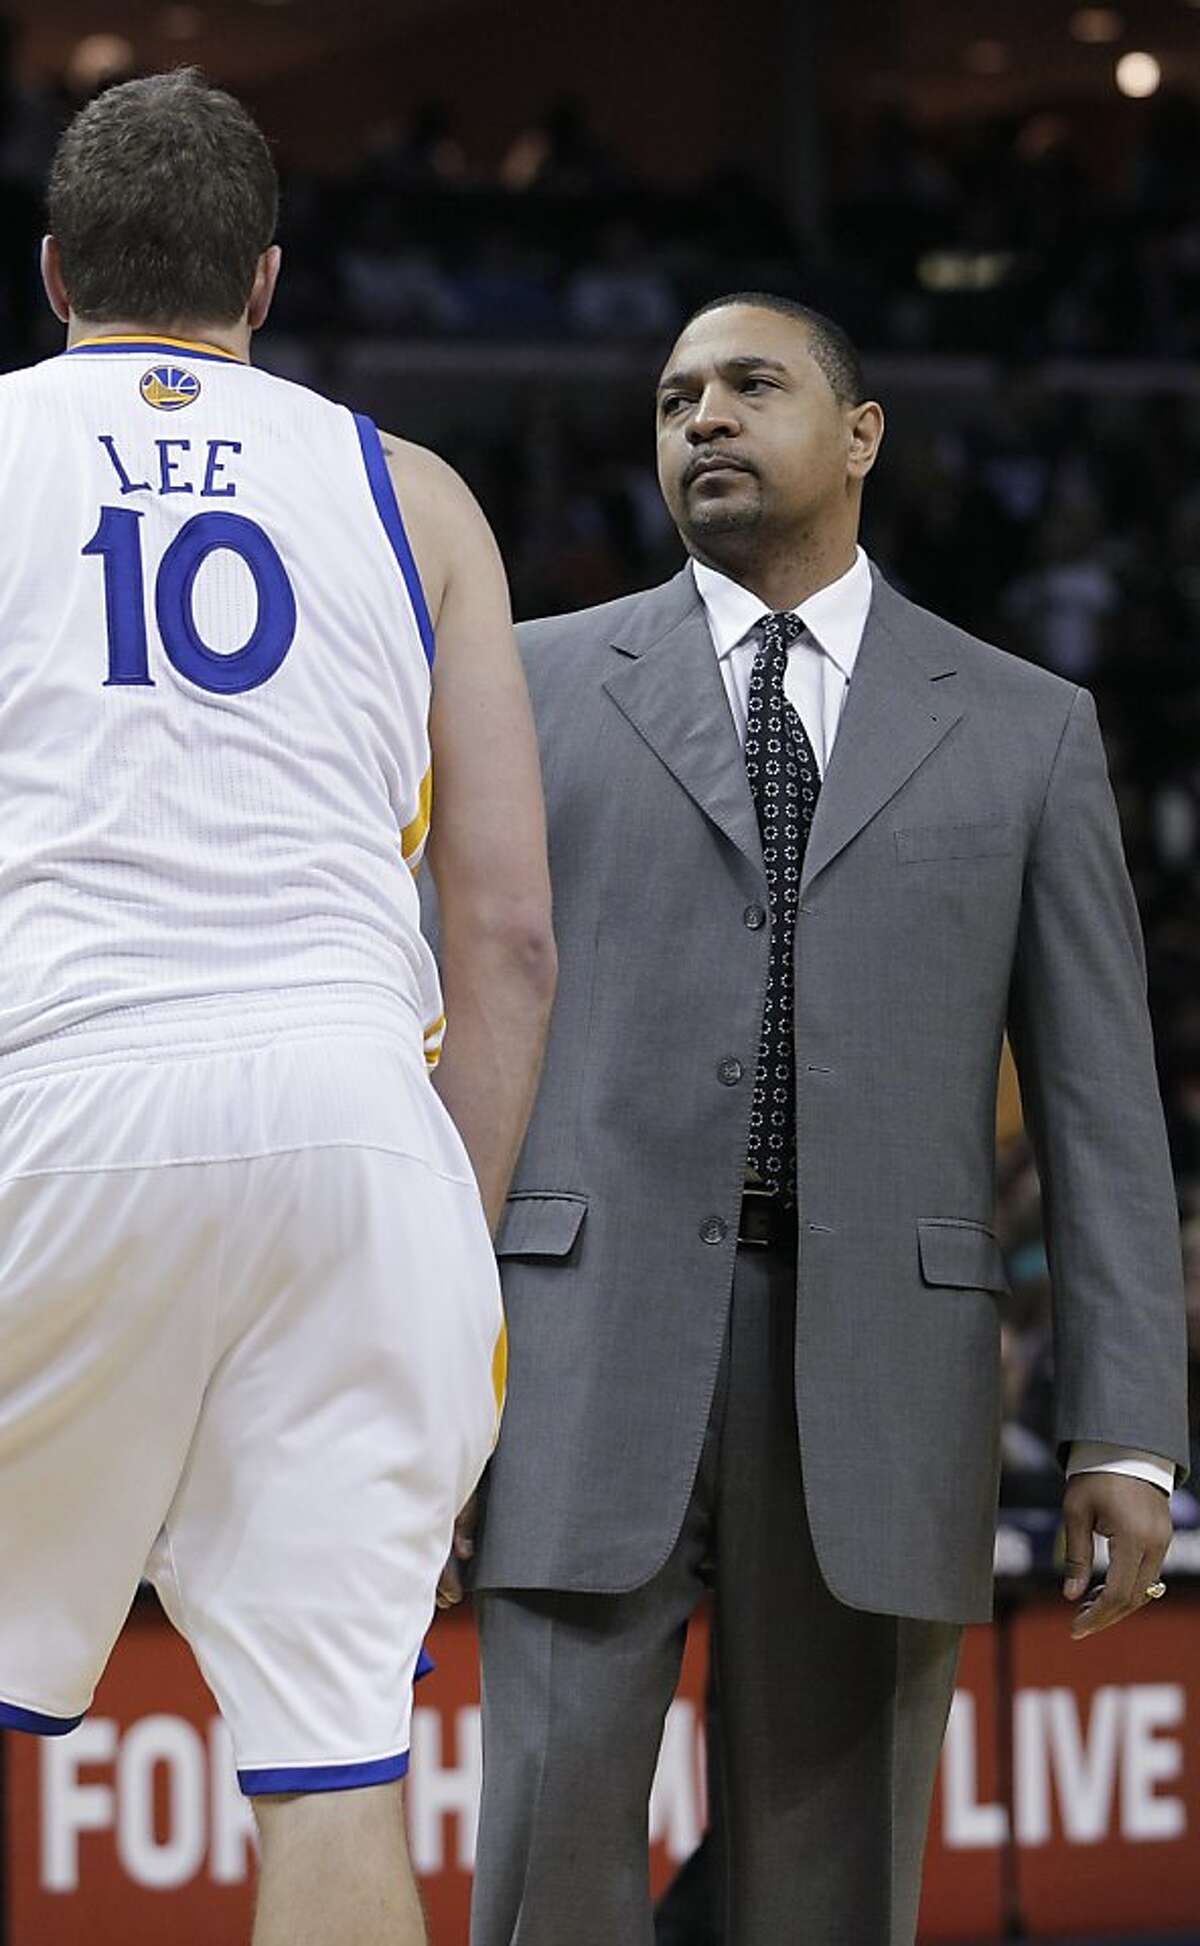 Golden State Warriors coach Mark Jackson, right, talks with forward David Lee during the second half of an NBA basketball game in Memphis, Tenn., Saturday, Feb. 18, 2012. Memphis defeated Golden State 104-103.